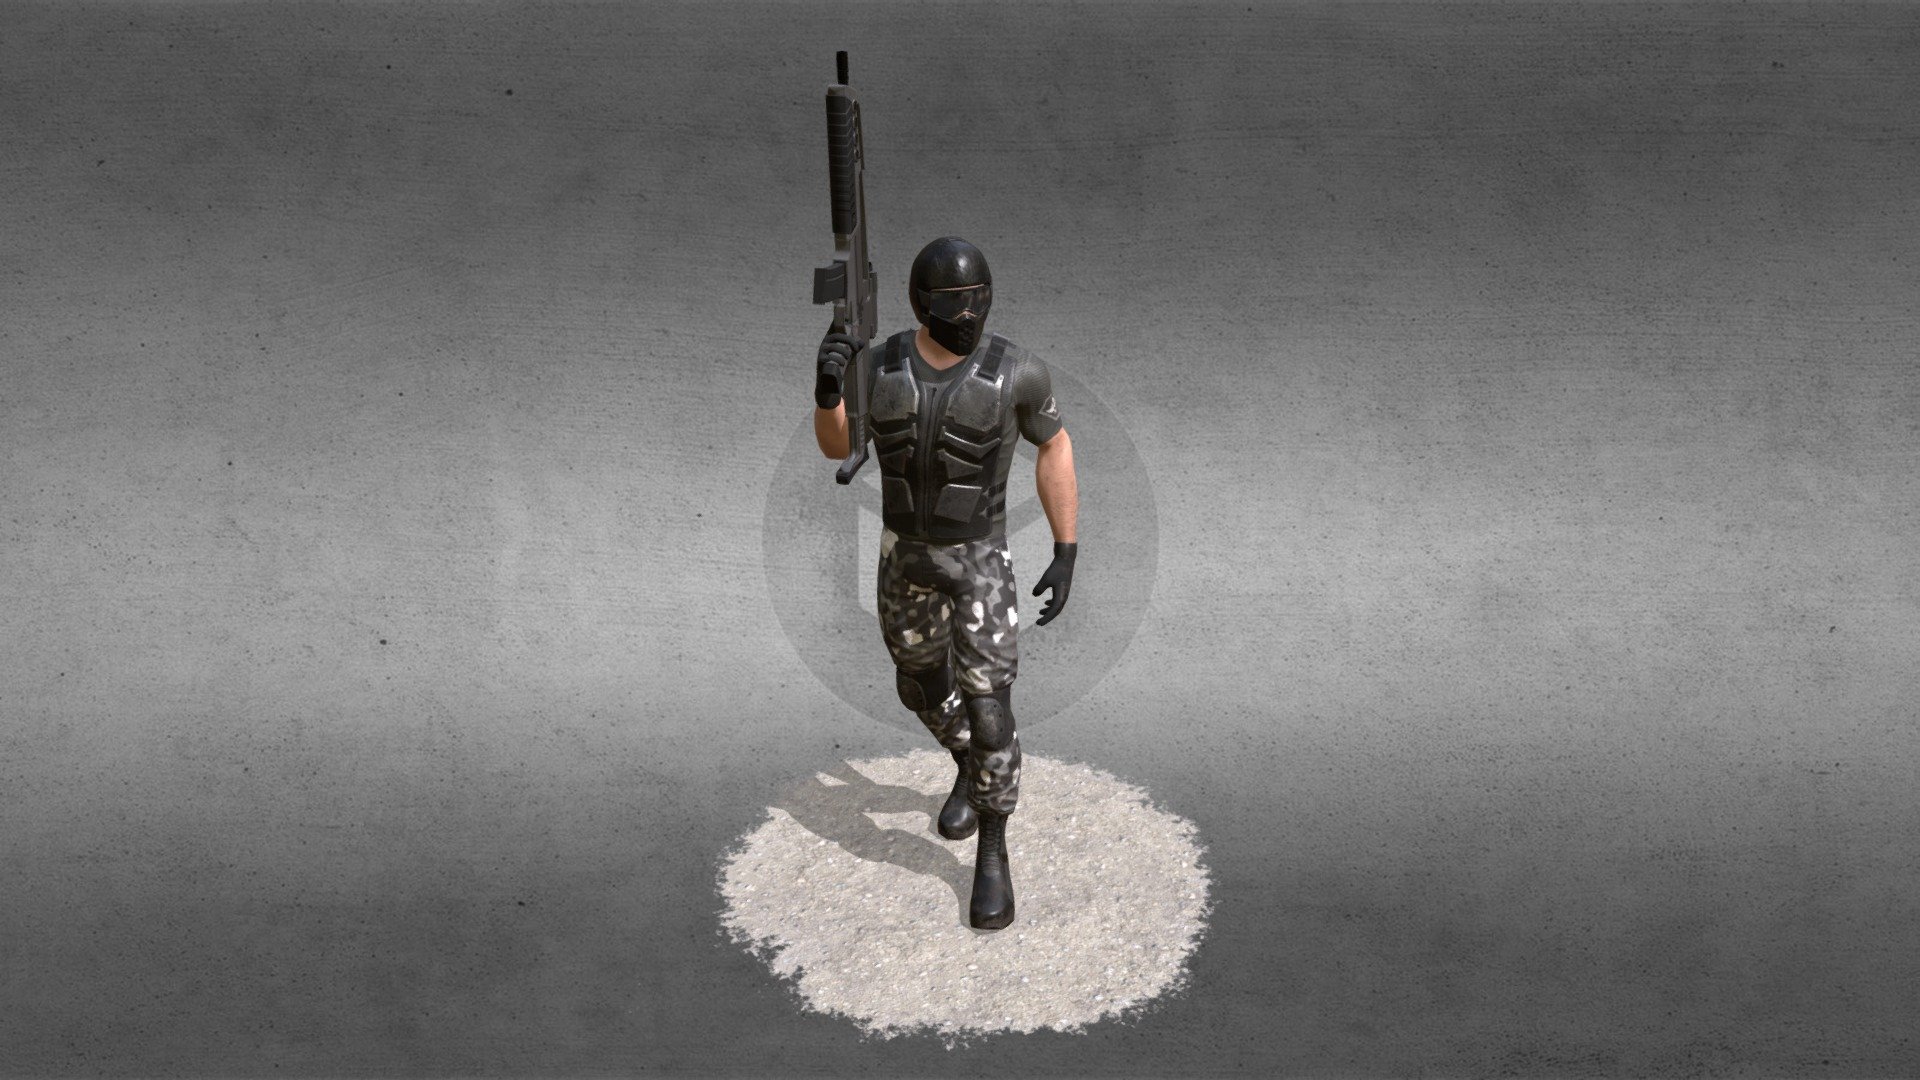 Lowpoly soldier for an internal project I worked on for my school (AIV- Accademia Italiana Videogiochi)

Software used: Zbrush, Maya, Substance Painter, Photoshop - X-Alliance Soldier - 3D model by Kardius 3d model